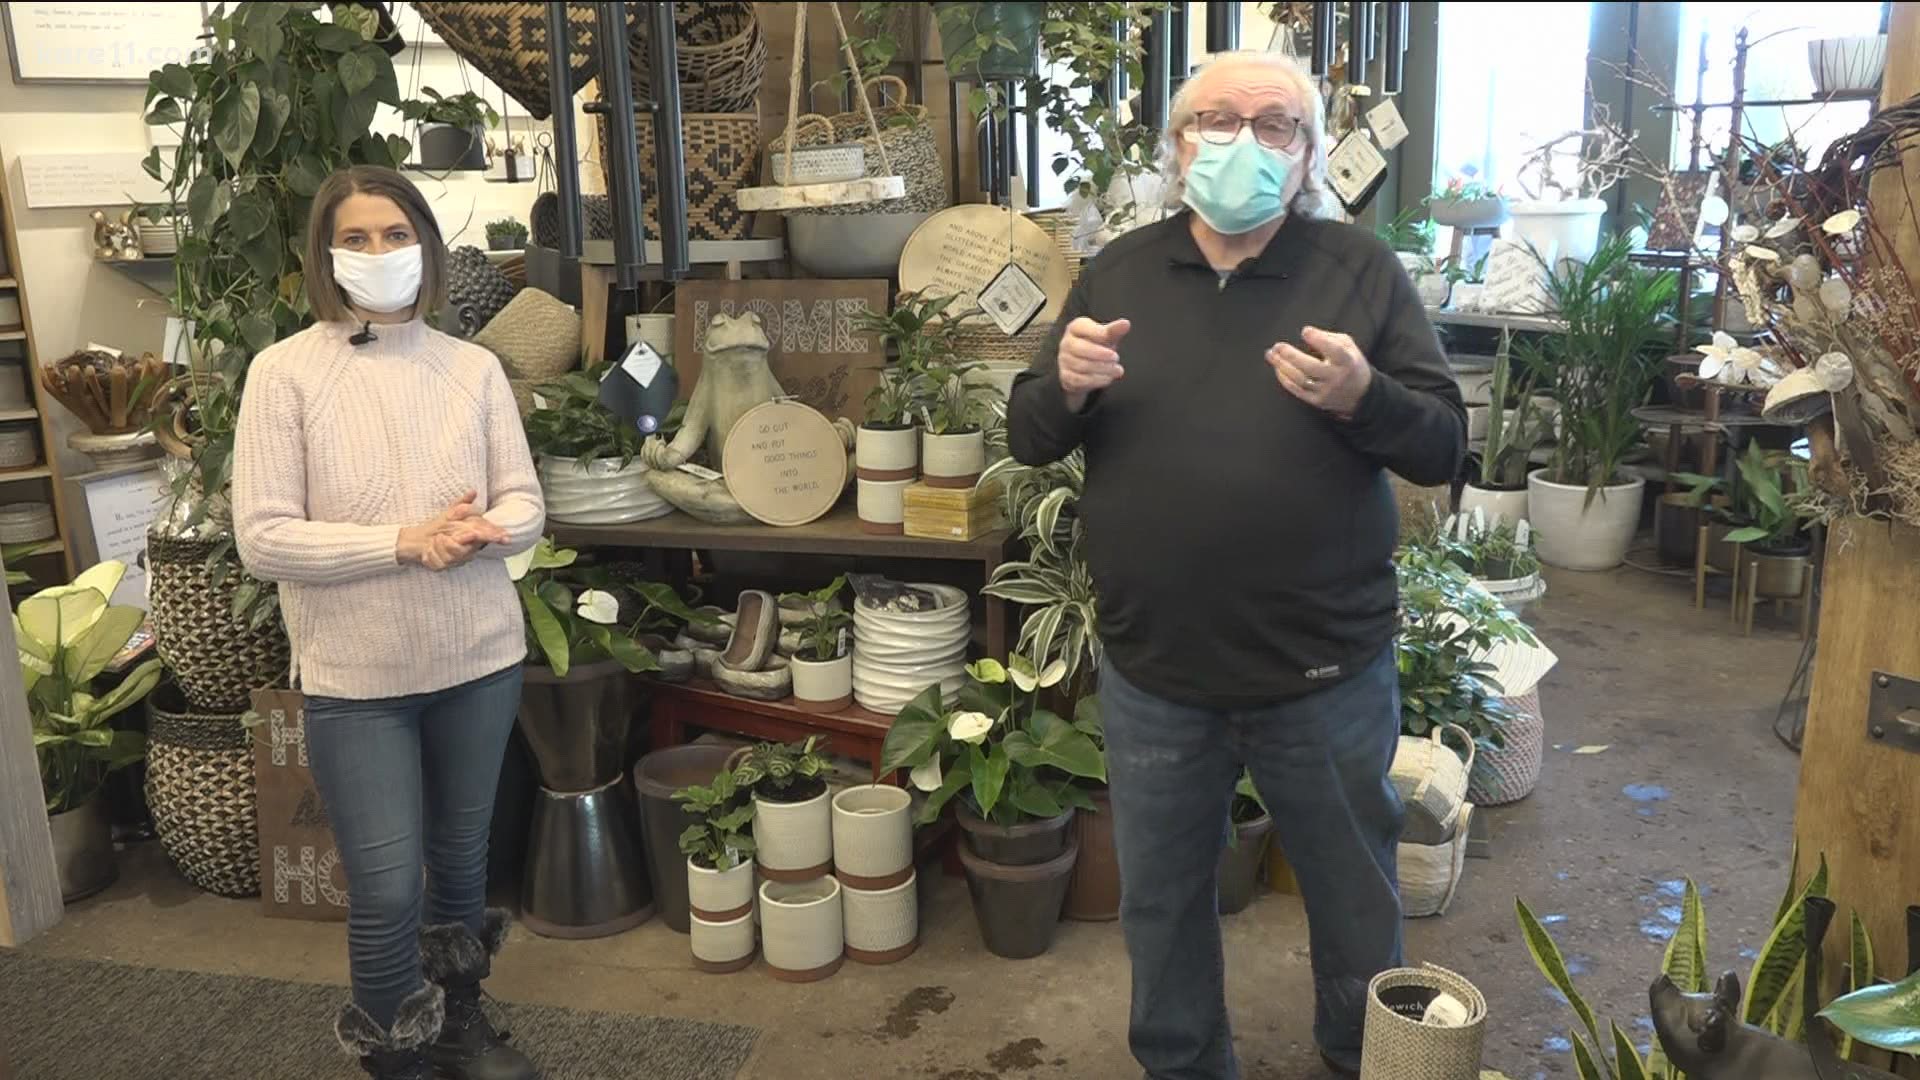 We asked and boy did you answer! From our Grow with KARE Facebook page, almost 900 of you commented. Bobby and Laura picked the best and most common advice.